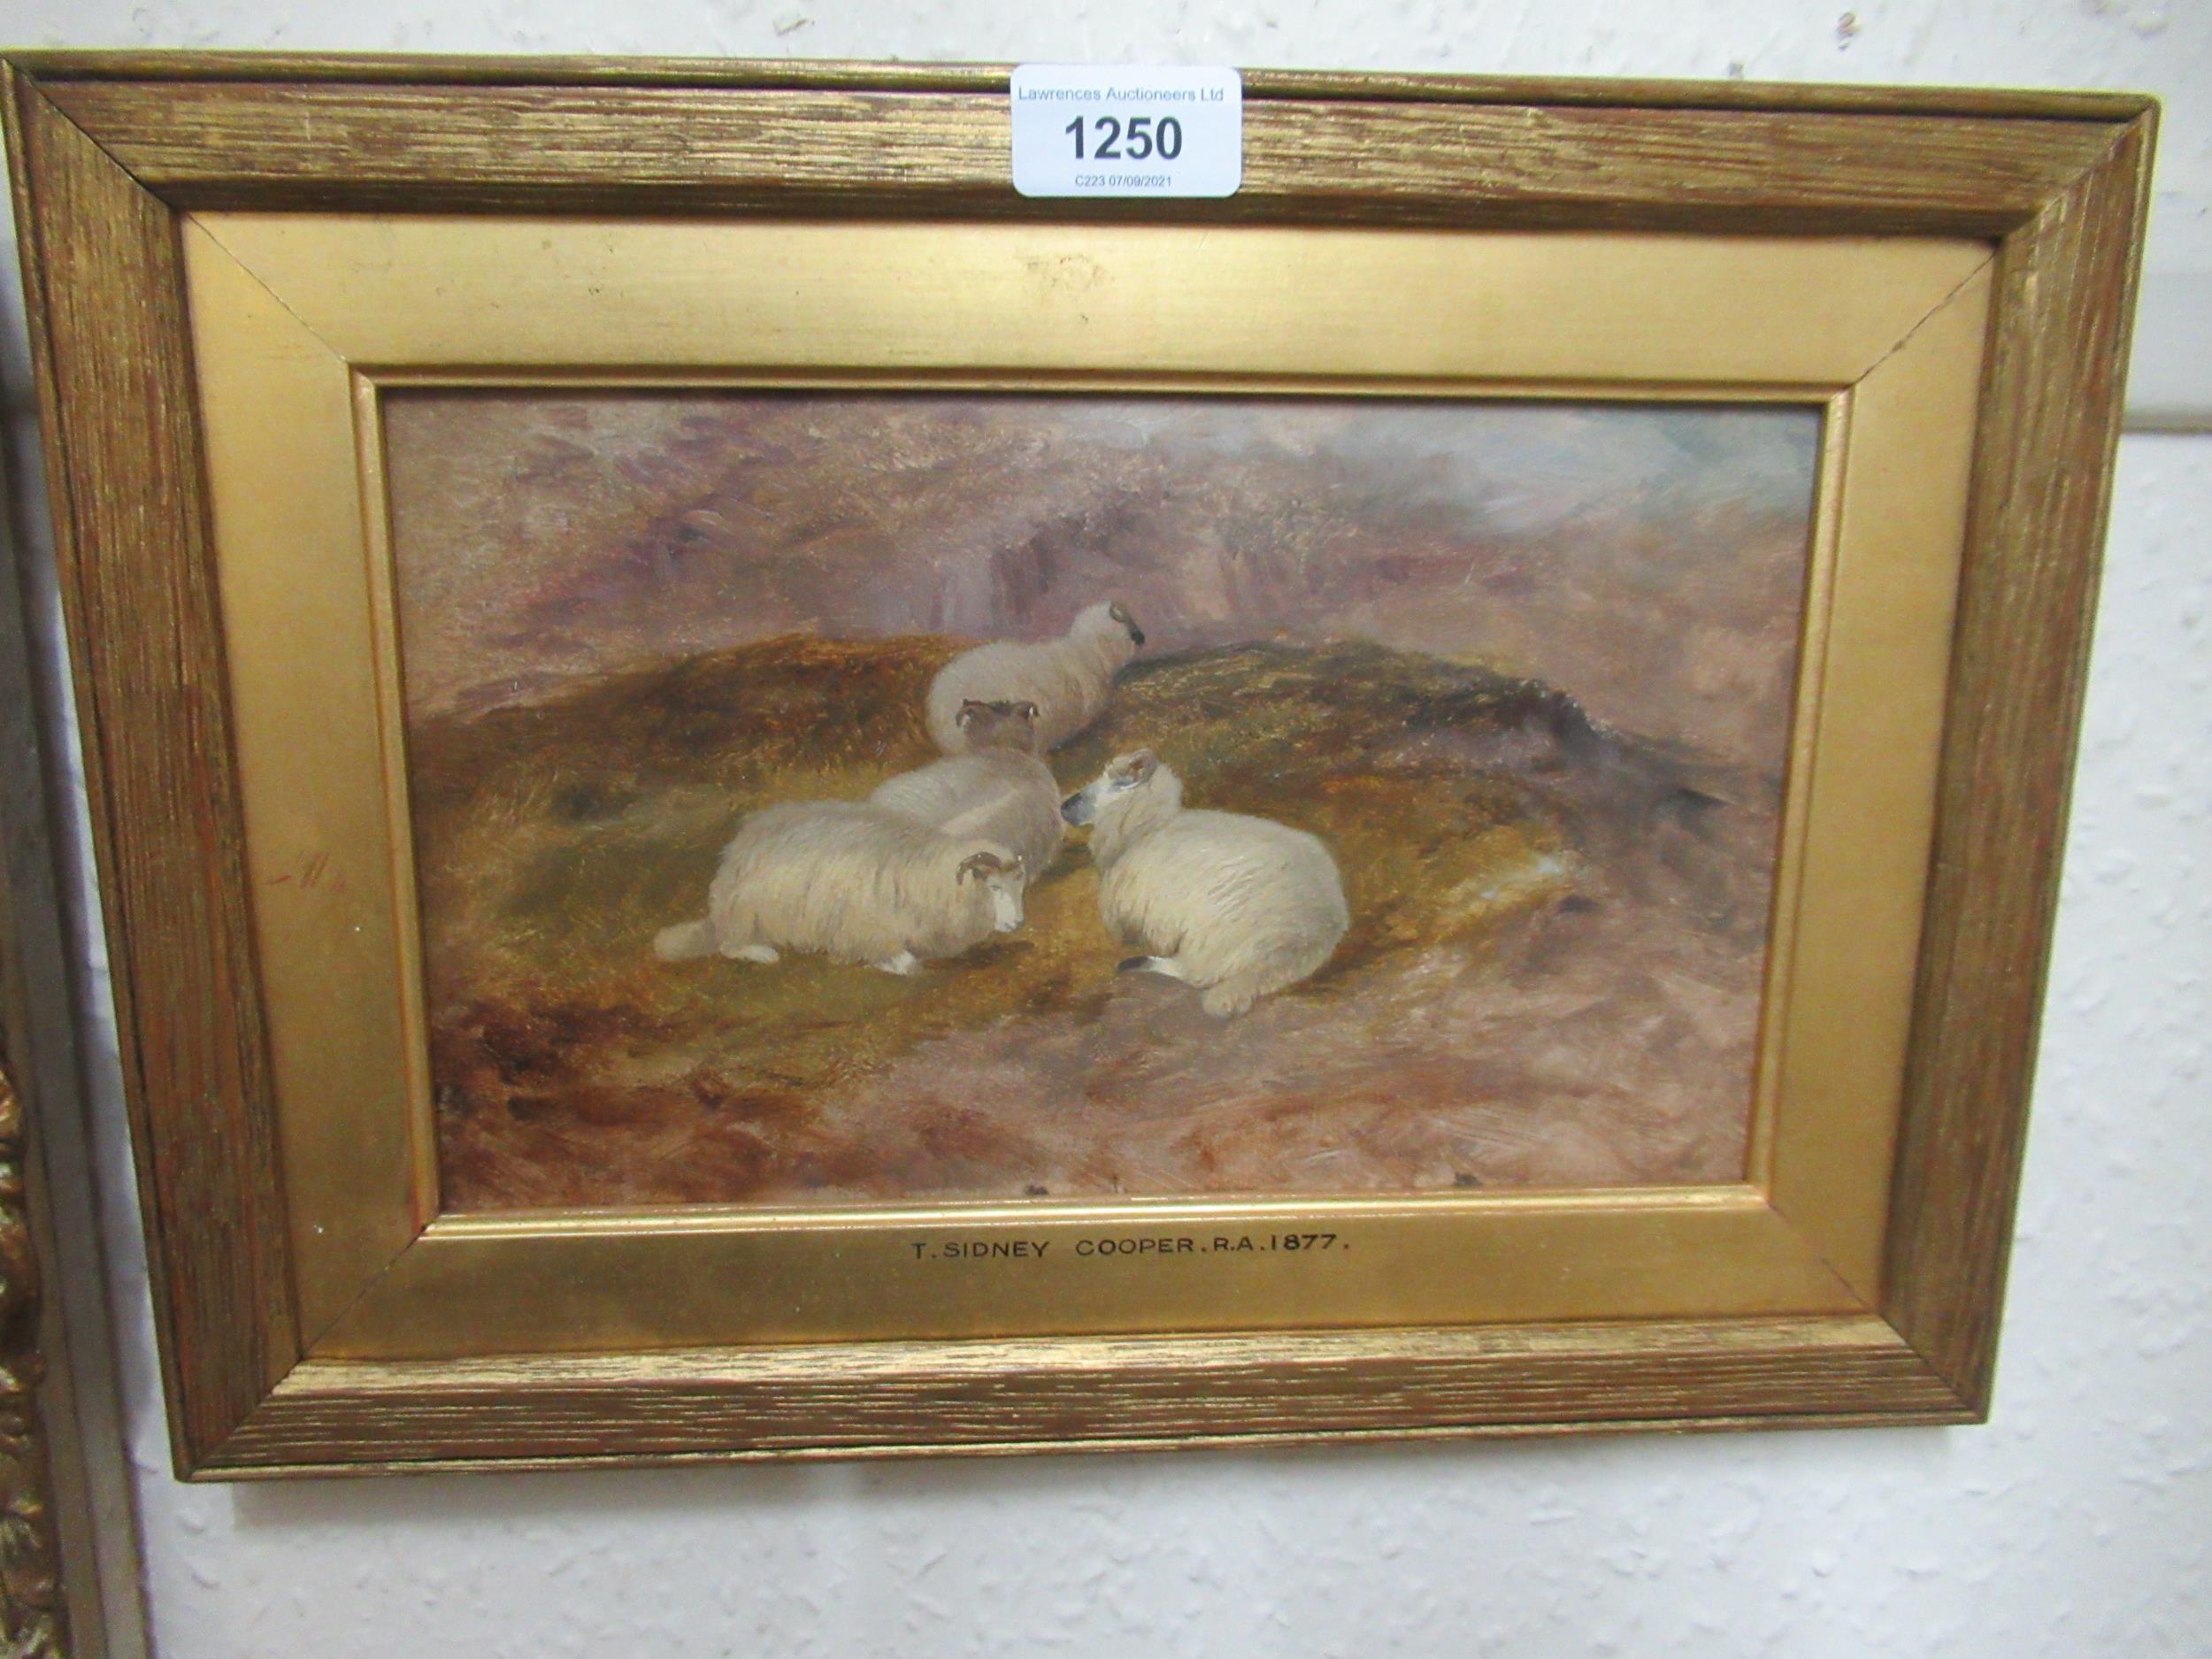 19th Century oil sketch on millboard, sheep on a hillside, inscribed on frame ' T. Sidney